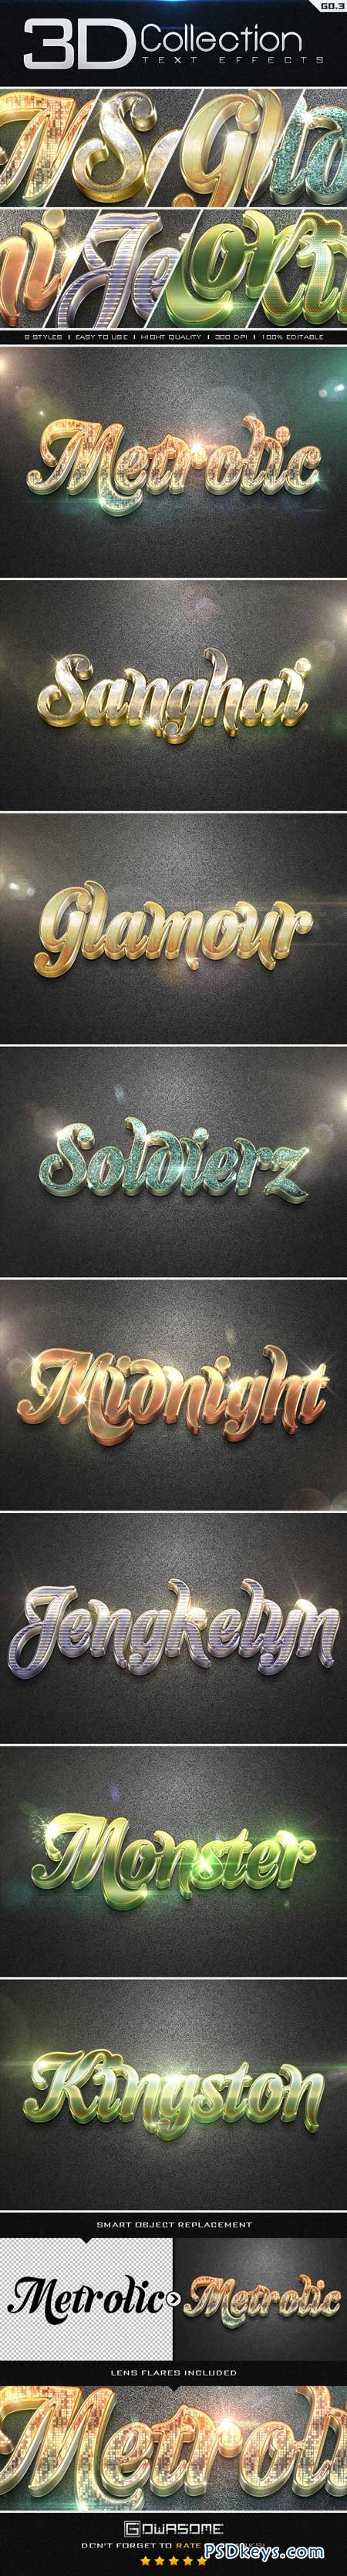 3D Collection Text Effects GO.3 8896234